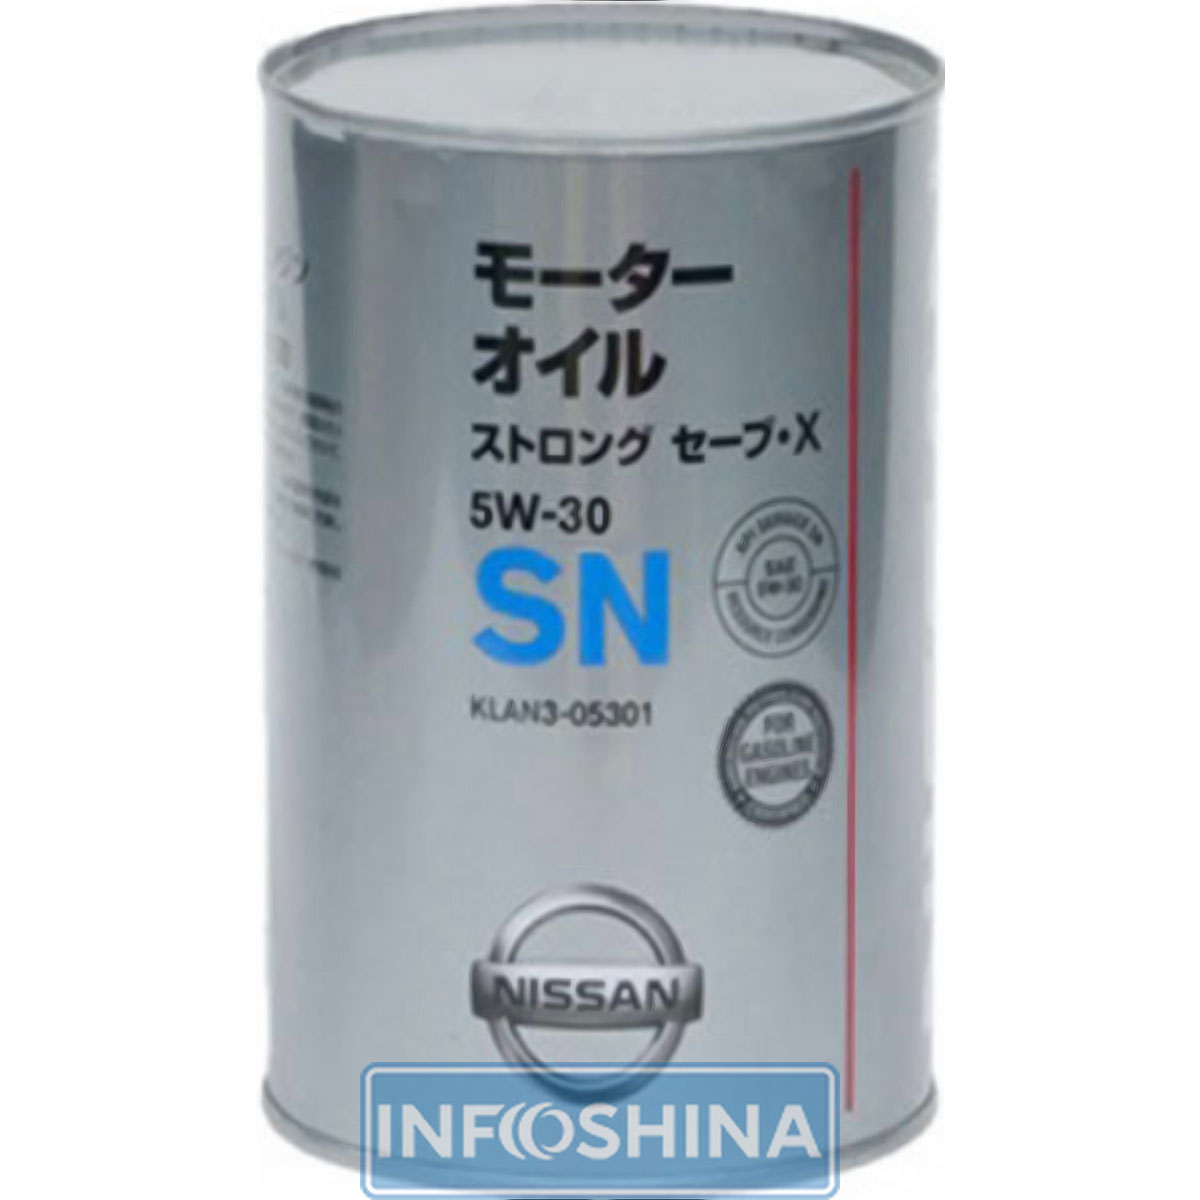 Nissan SN Strong Save X 5W-30